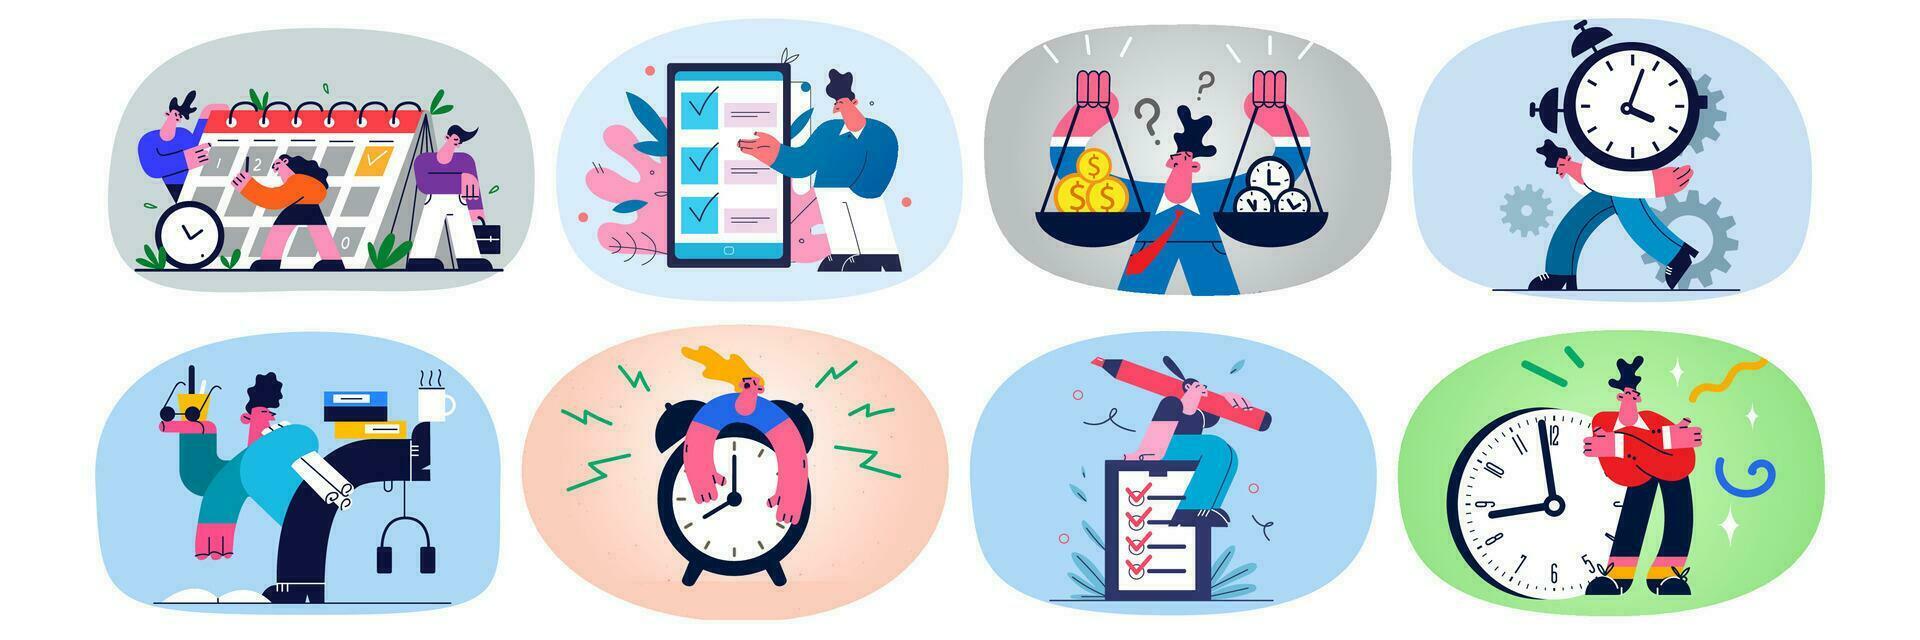 Set of diverse employees or workers multitask manage meet deadline, finish business task. Collection of businesspeople overwhelmed with workload. Overwork concept. Vector illustration.